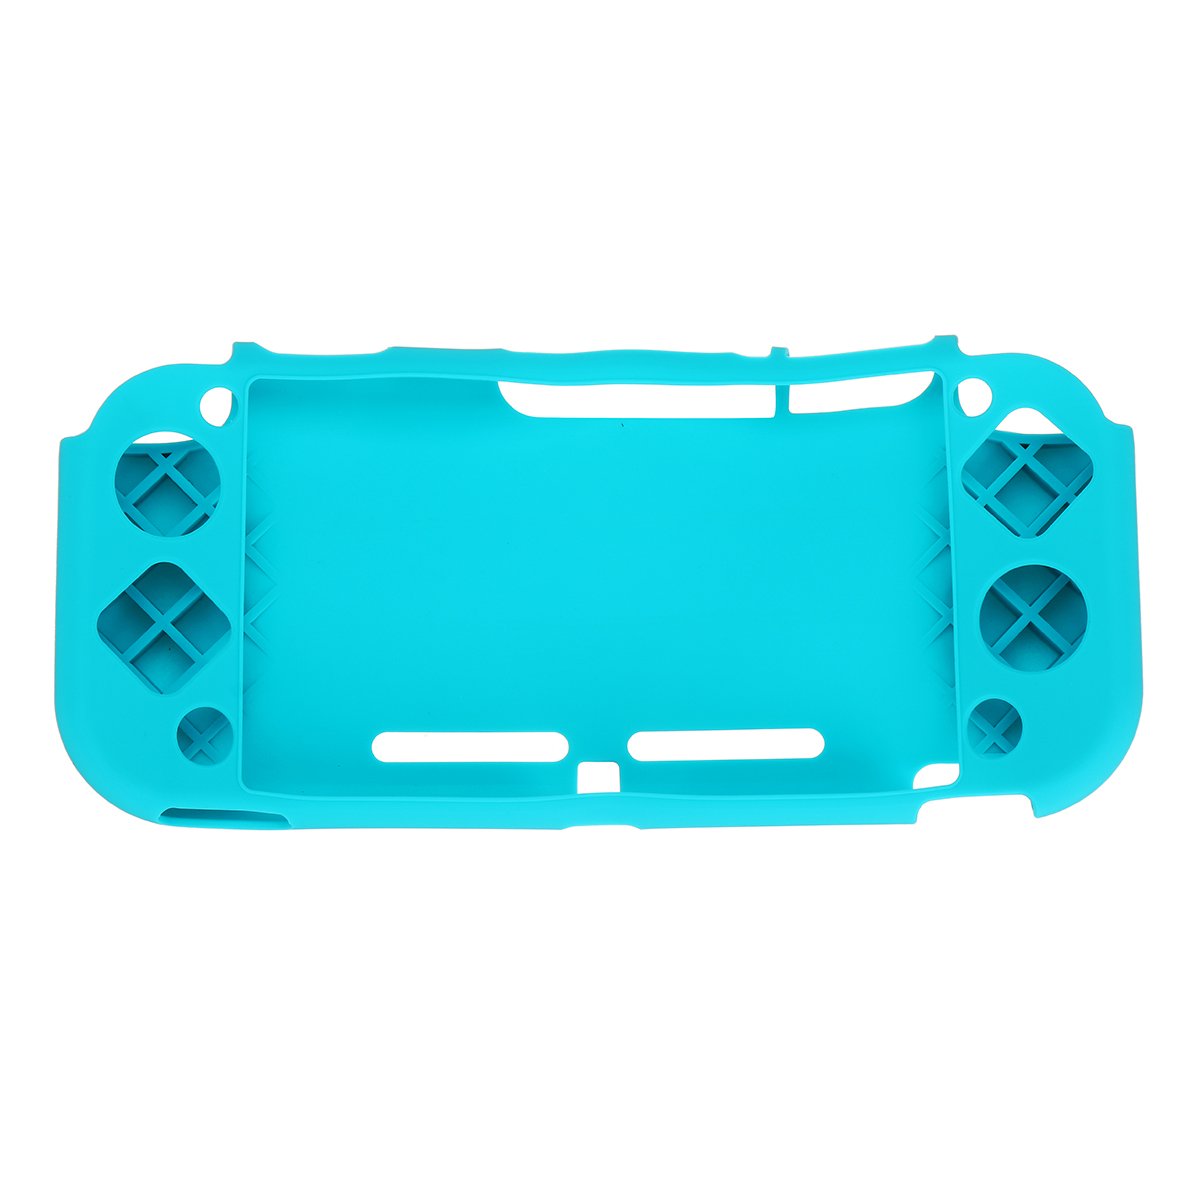 Protective Soft Silicone Case Cover Shell For Nintendo Switch Lite Game Console